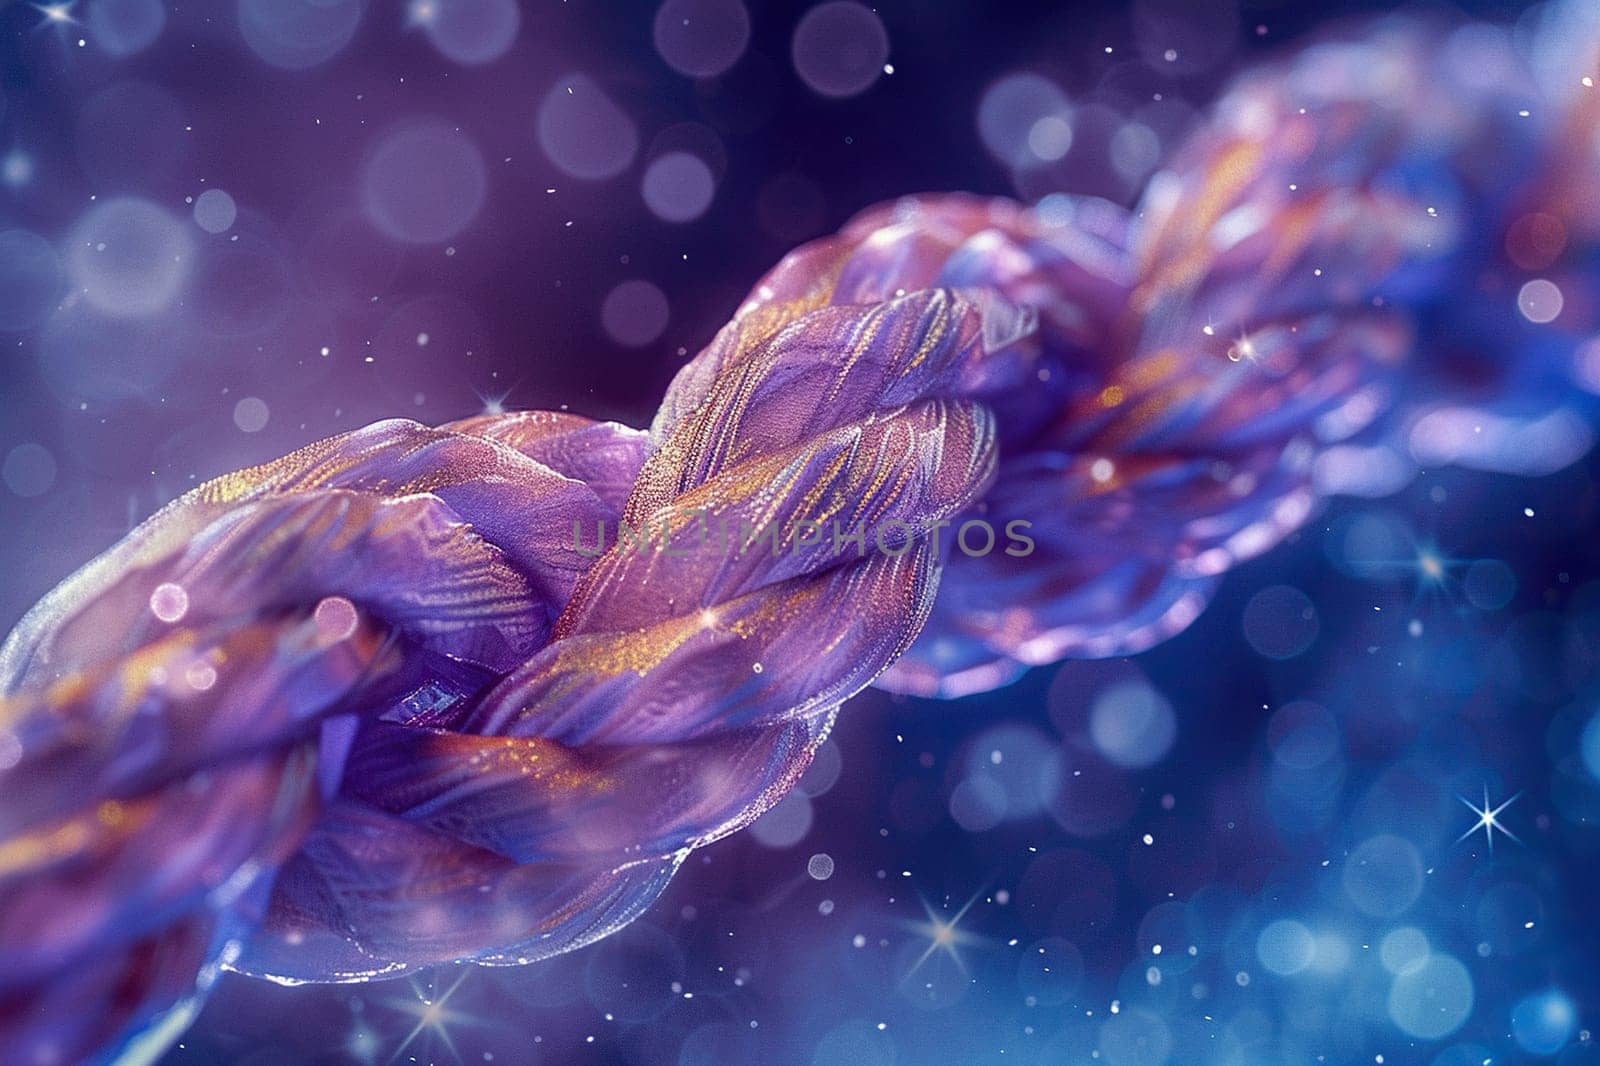 Abstract image of a rope weave on a purple background with highlights and sparkles. Generated by artificial intelligence by Vovmar